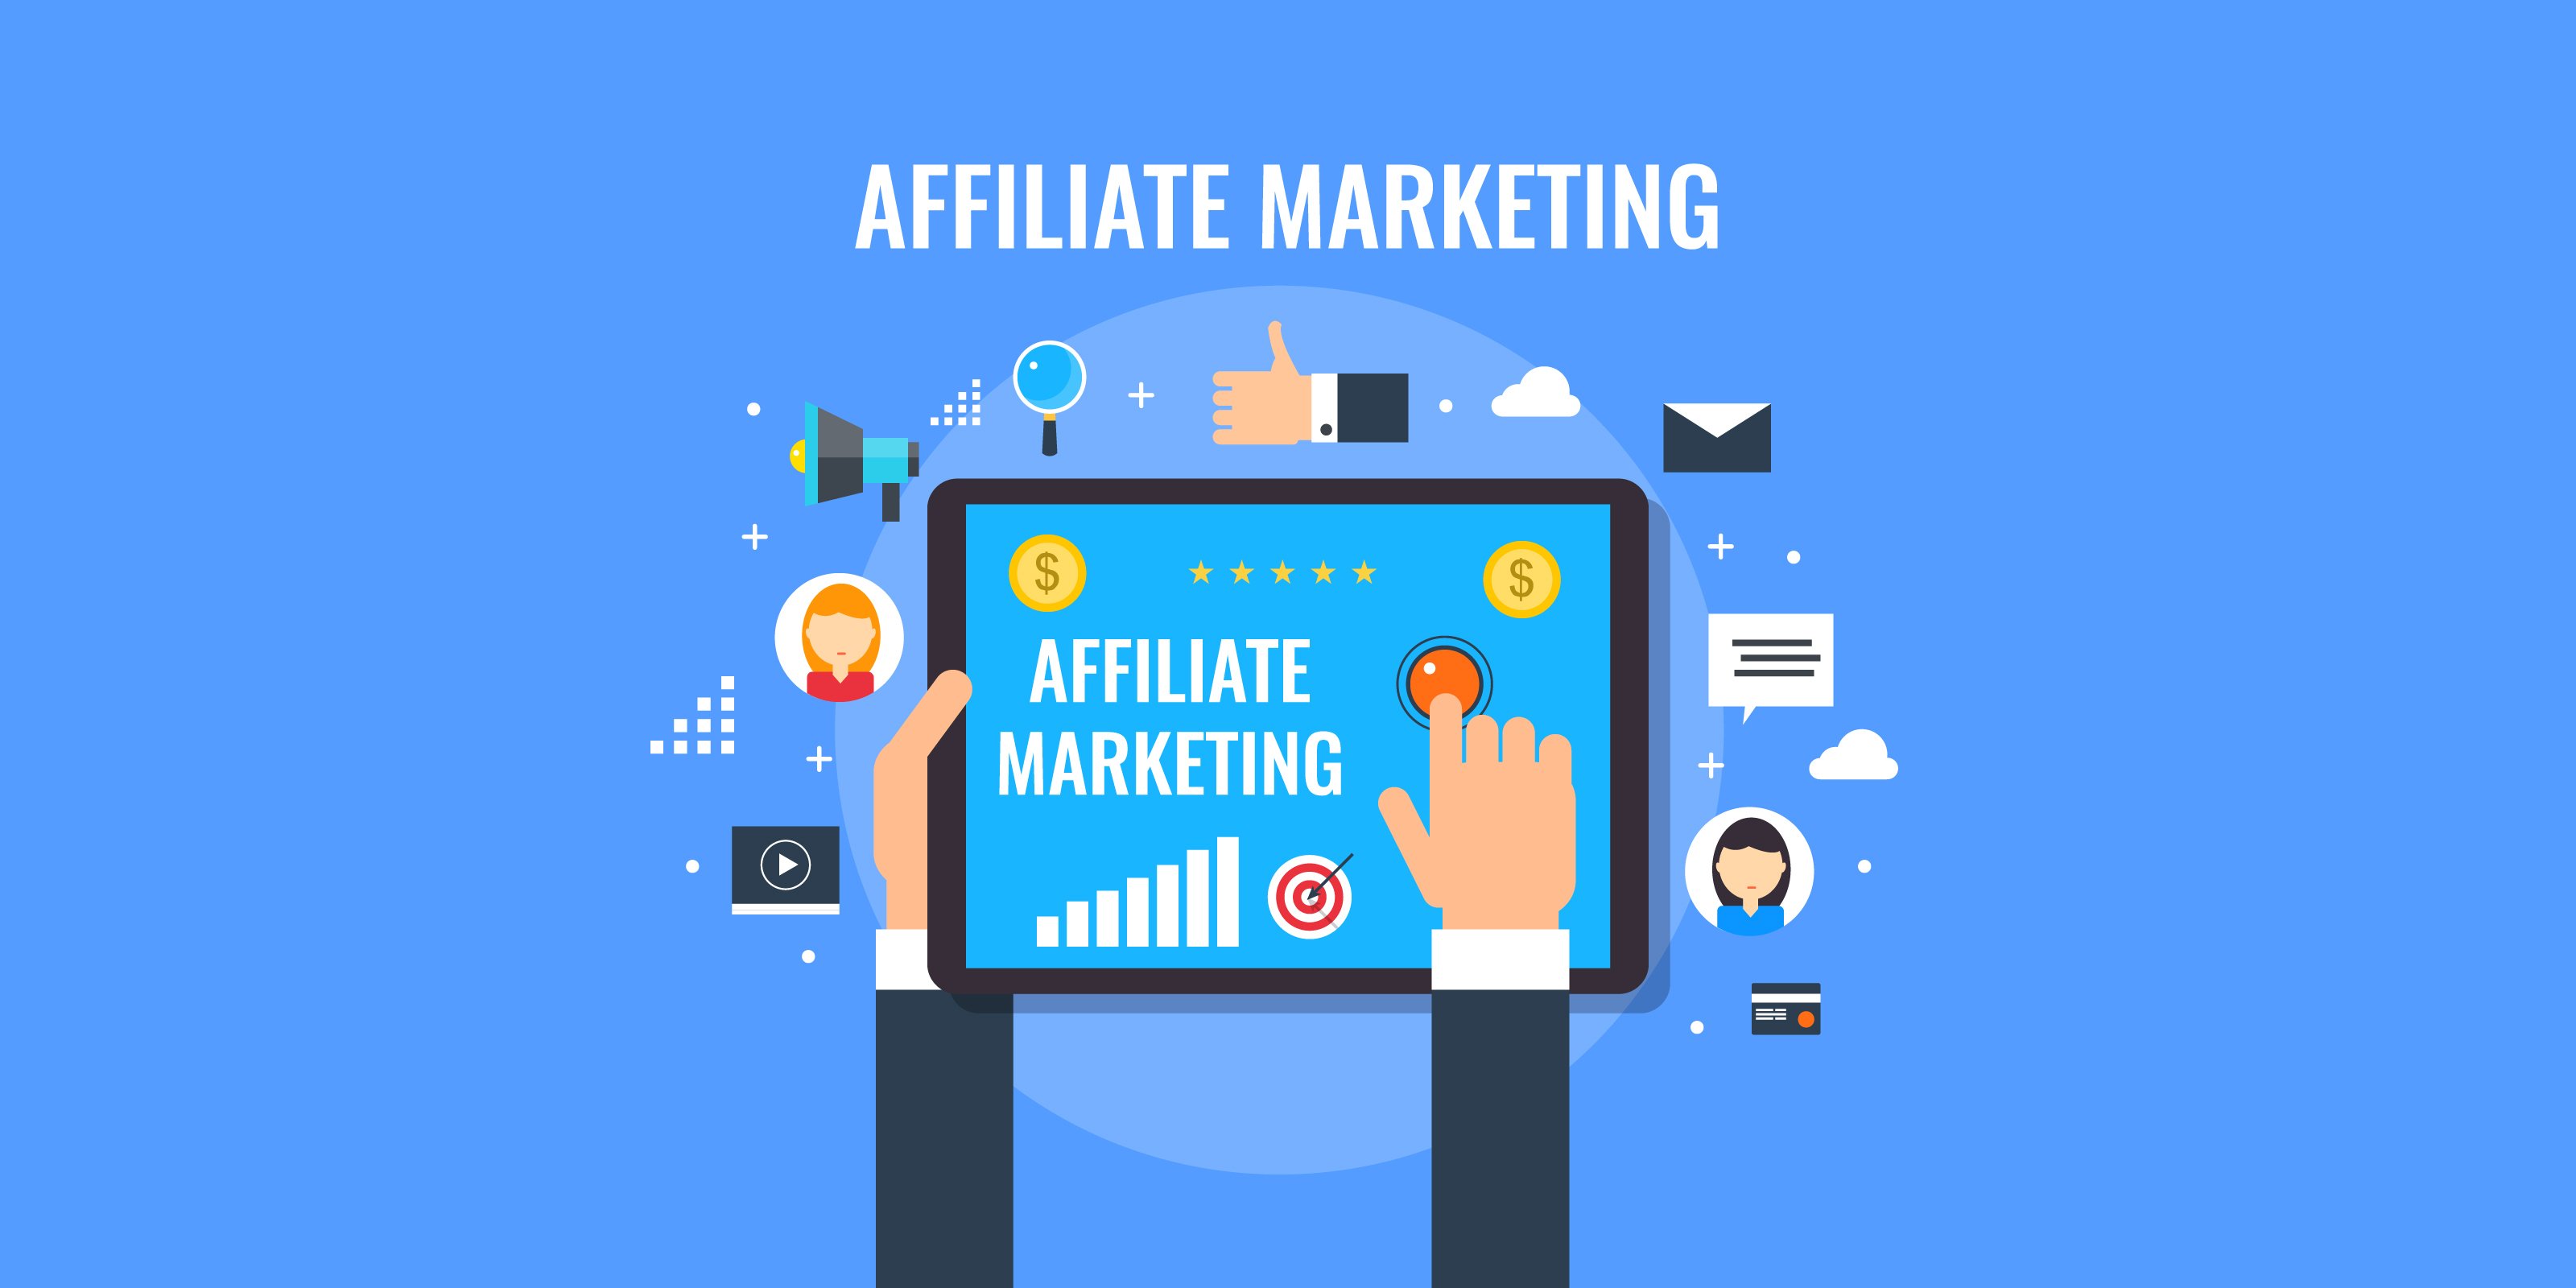 How to Create an Affiliate Marketing Program for Your Company